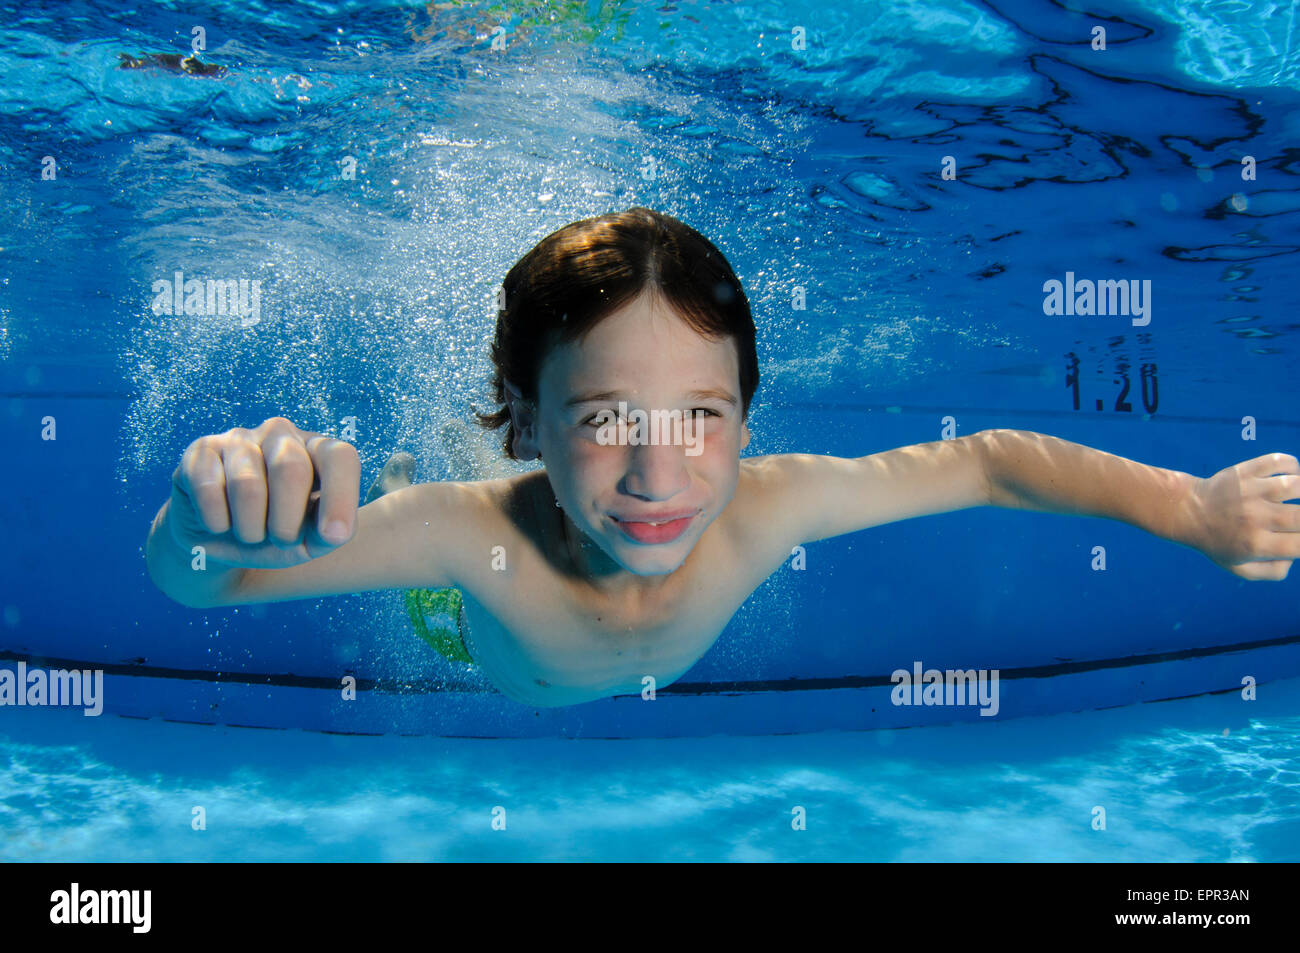 Young boy holds her breath while swimming underwater Stock Photo